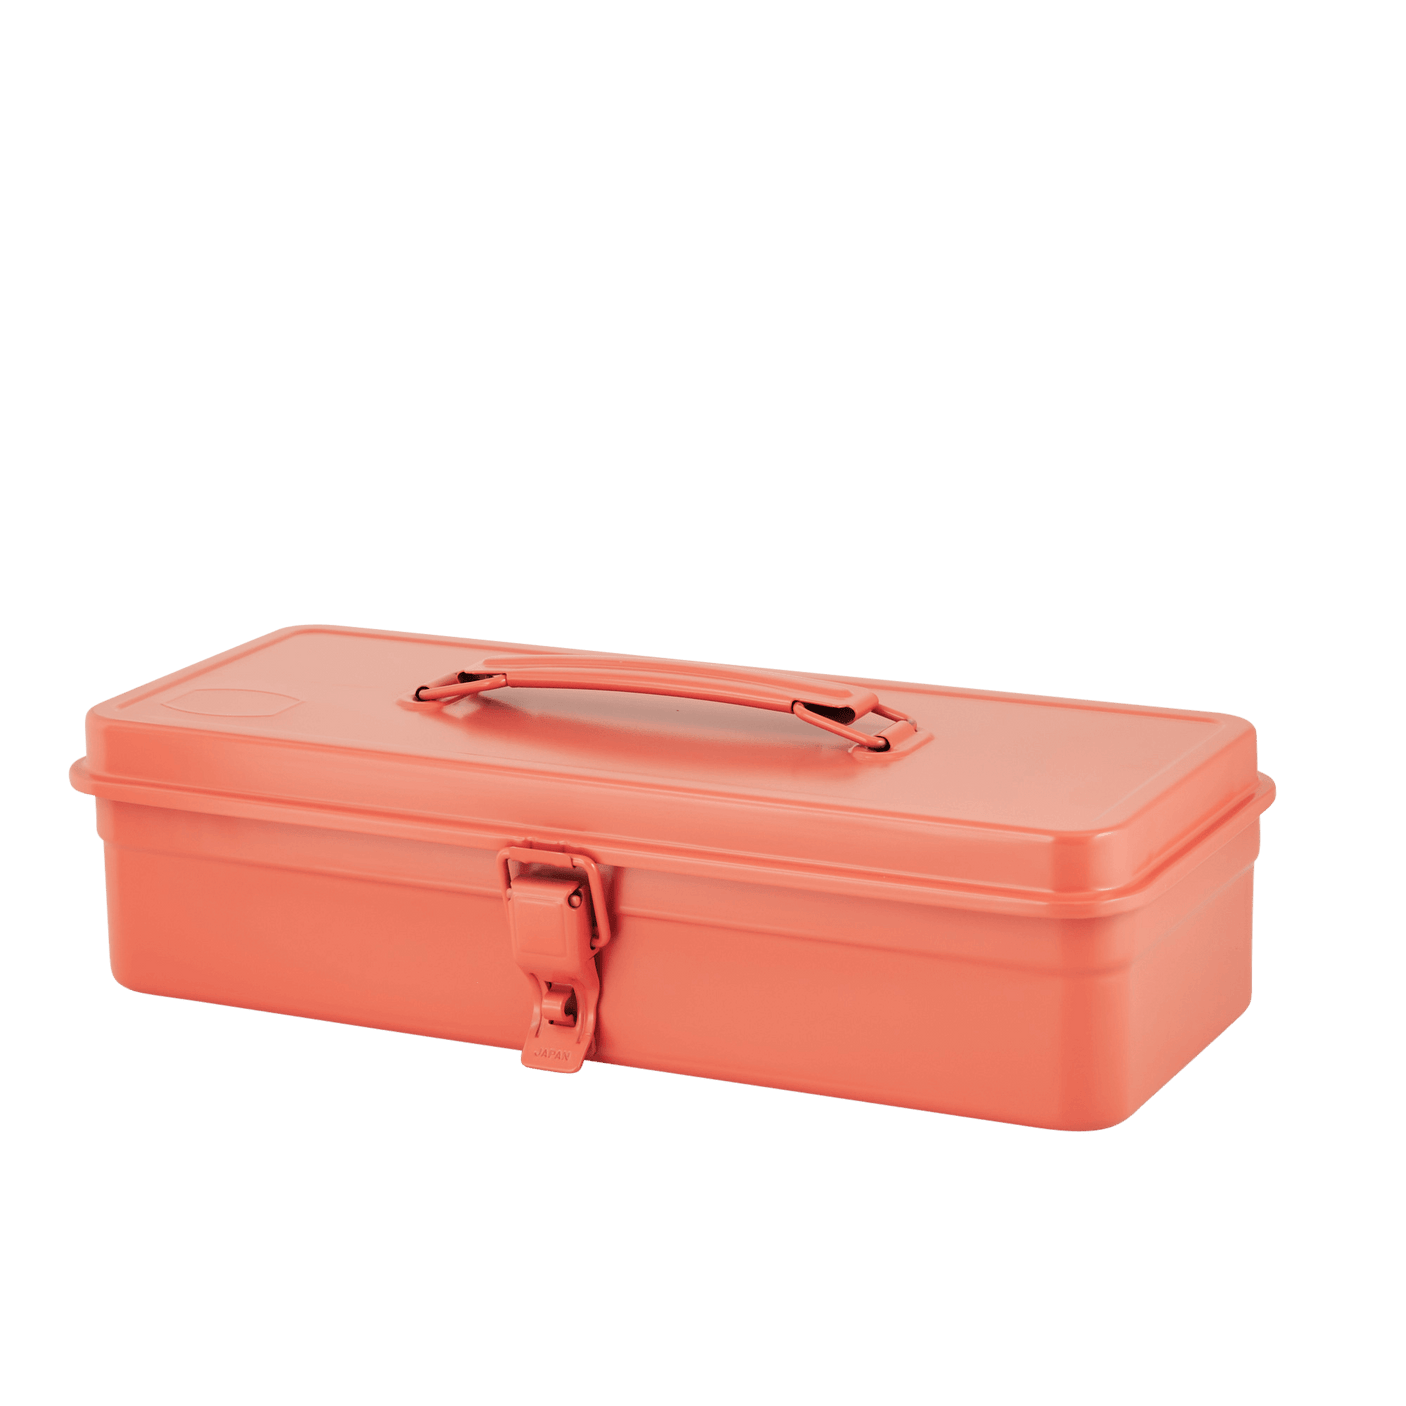 TOYO Trunk Shape Toolbox T-320 P0 (Living coral) - Tool Bags Boxes and Rolls - Japanese Tools Australia